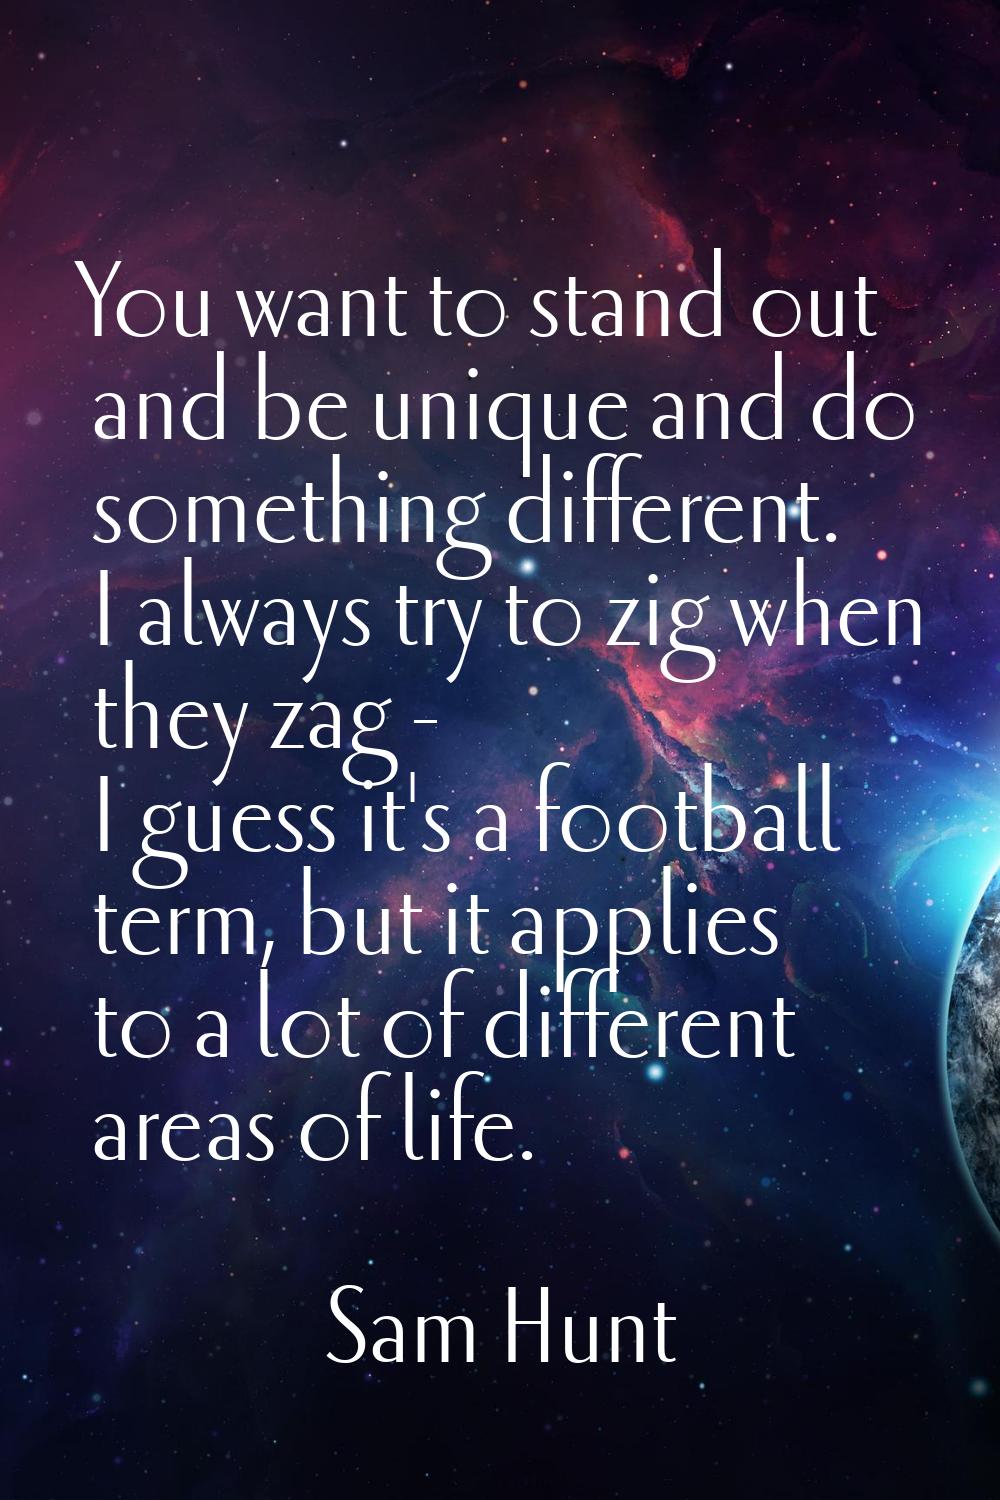 You want to stand out and be unique and do something different. I always try to zig when they zag -